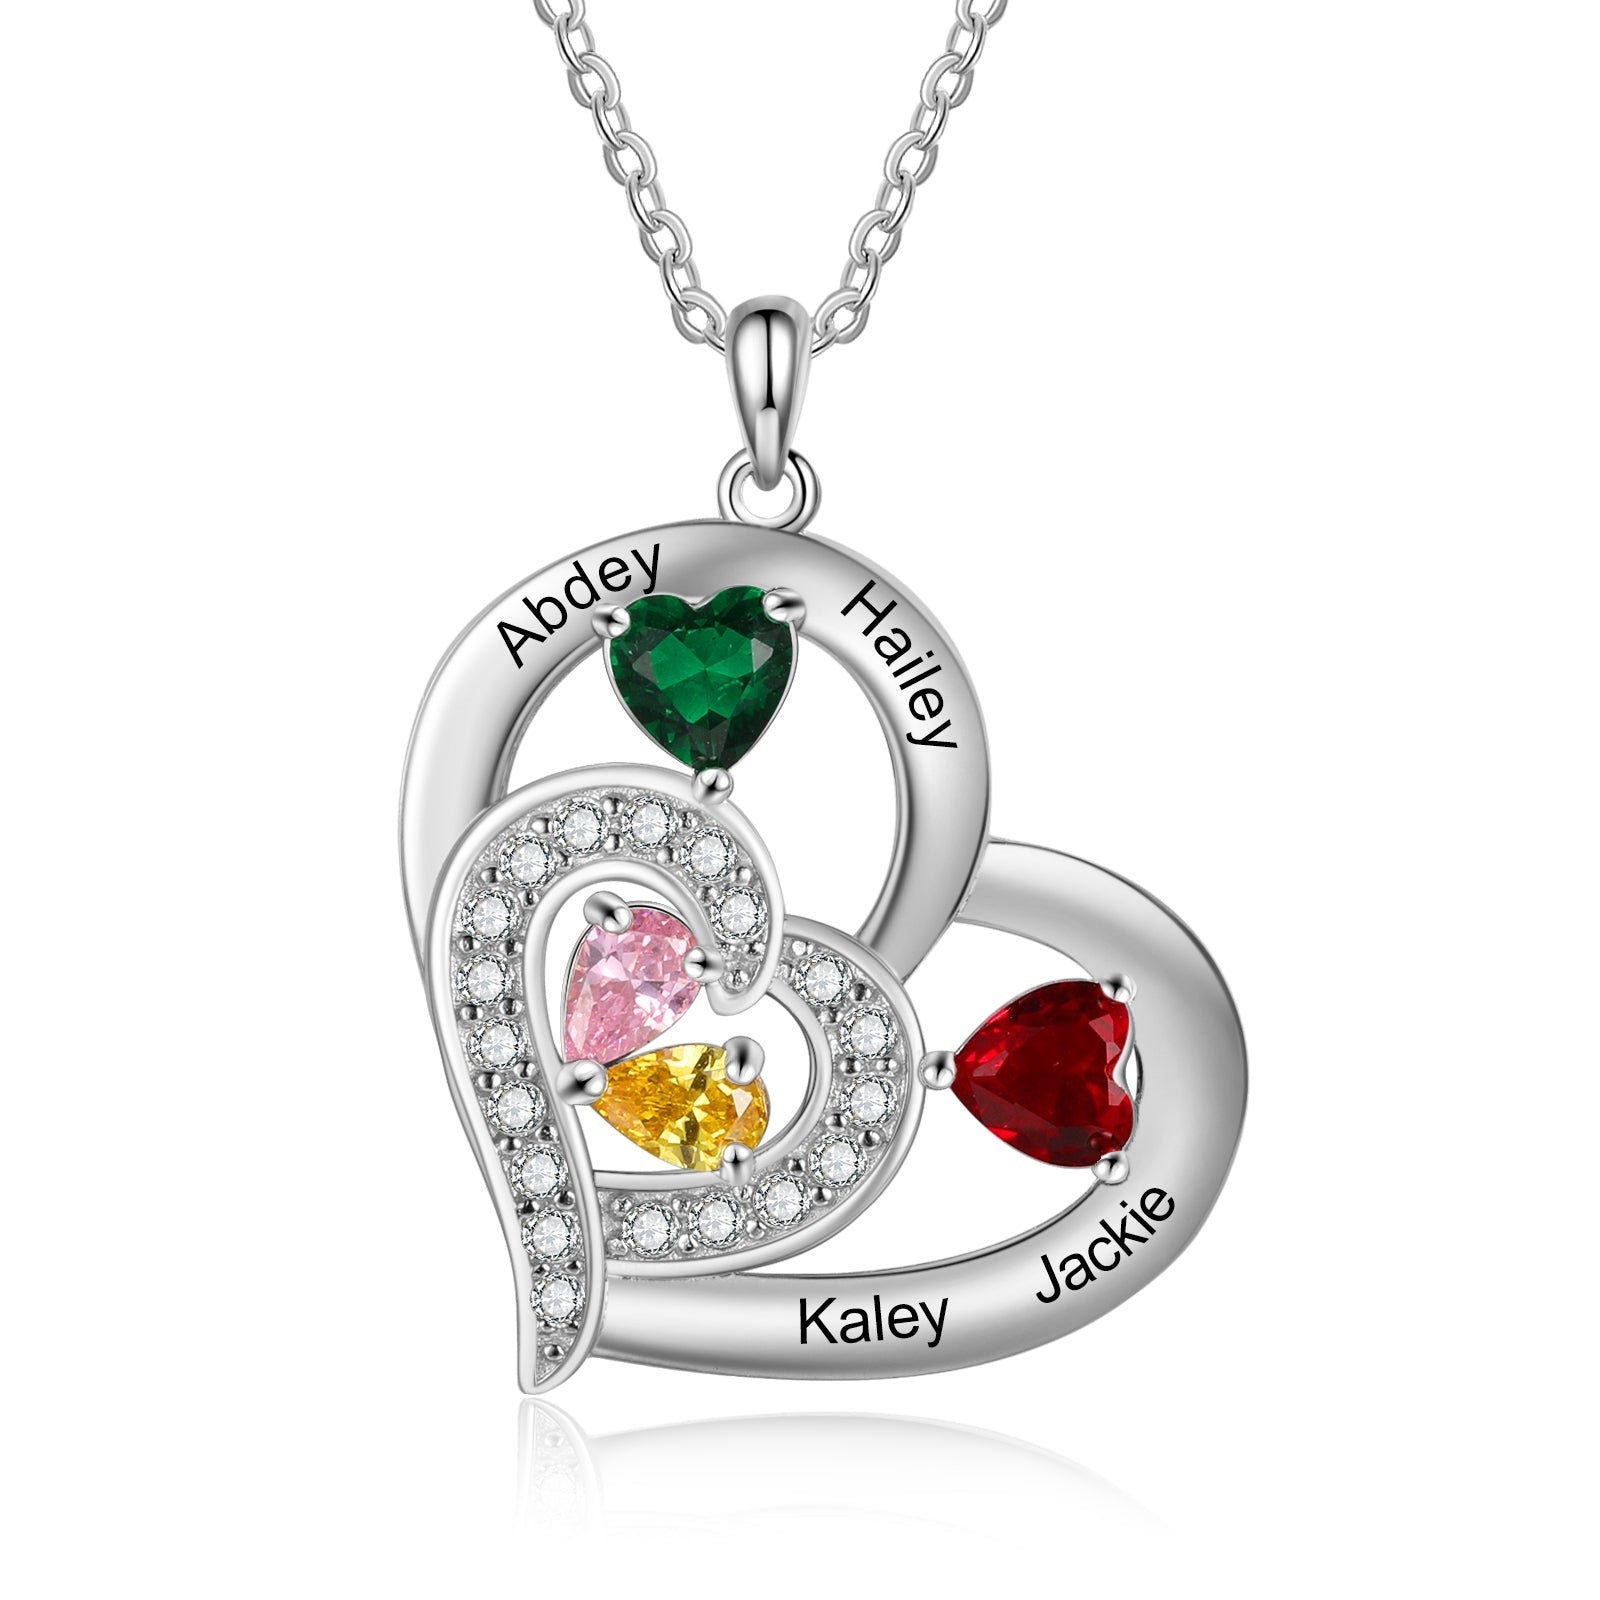 Personalized 1-6 Name Engraving Heart Pendant Classic Custom DIY Birthstone Necklace